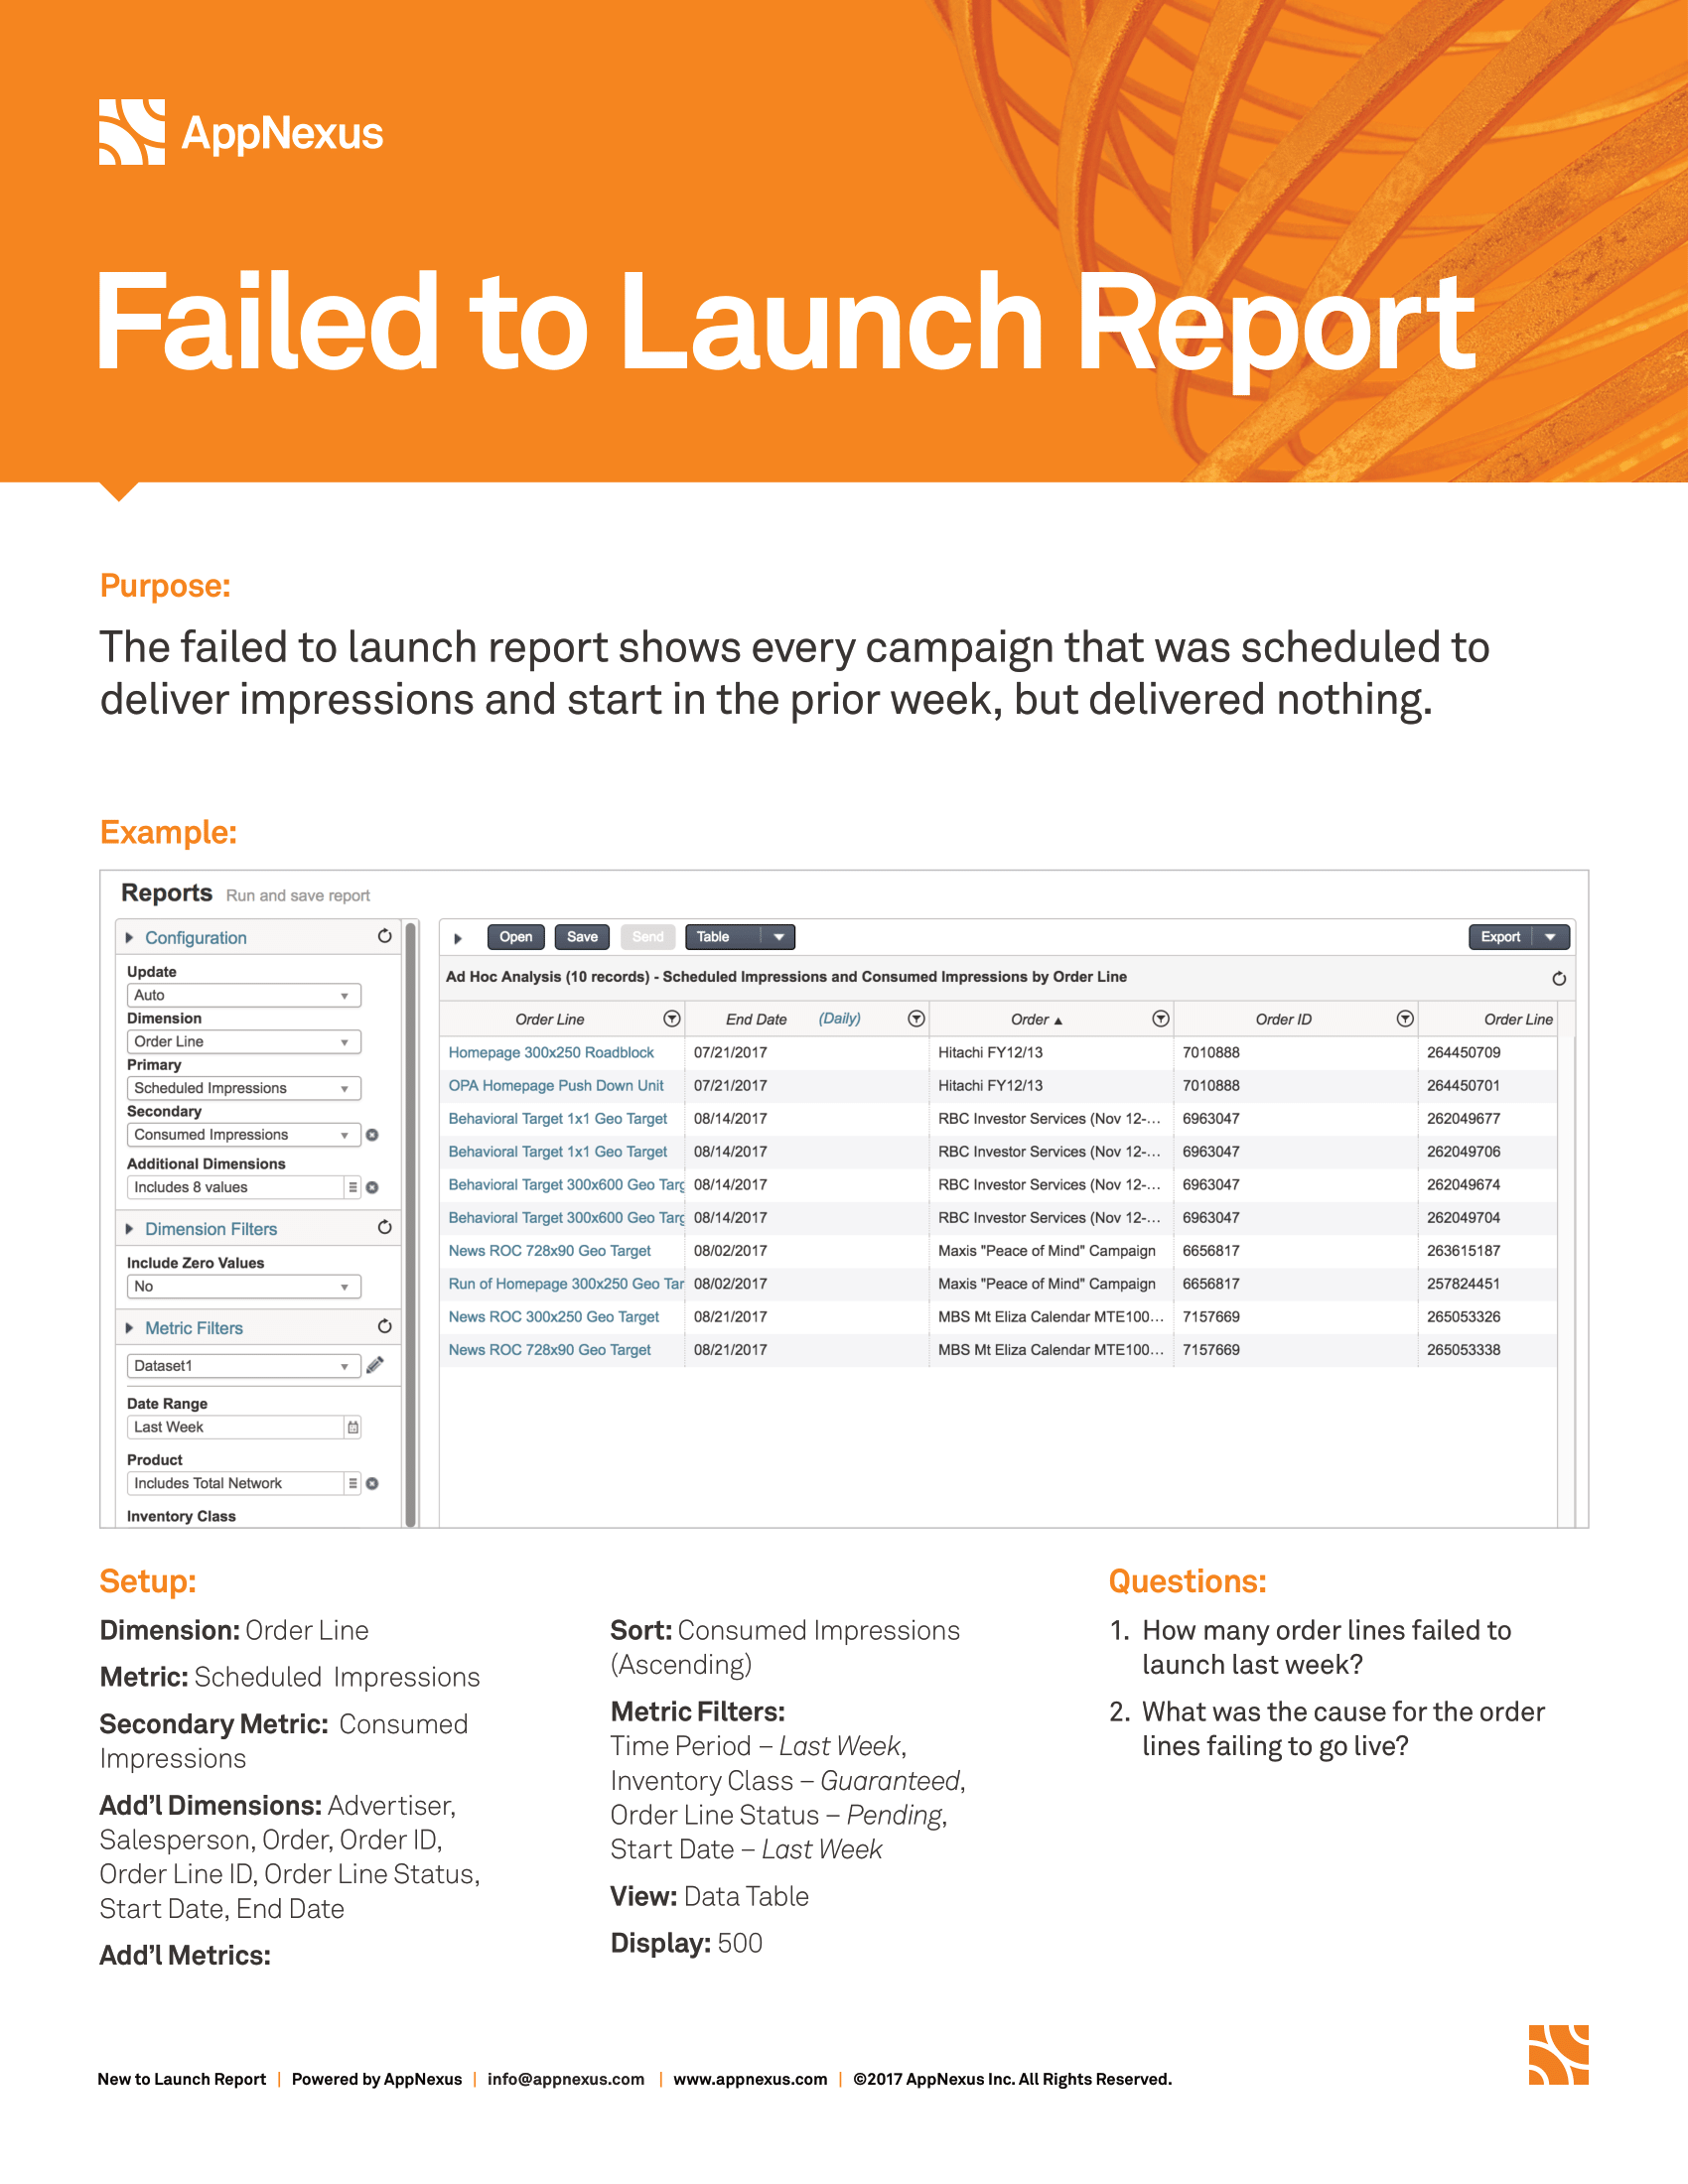 Screenshot that provides details about the Failed to Launch report.